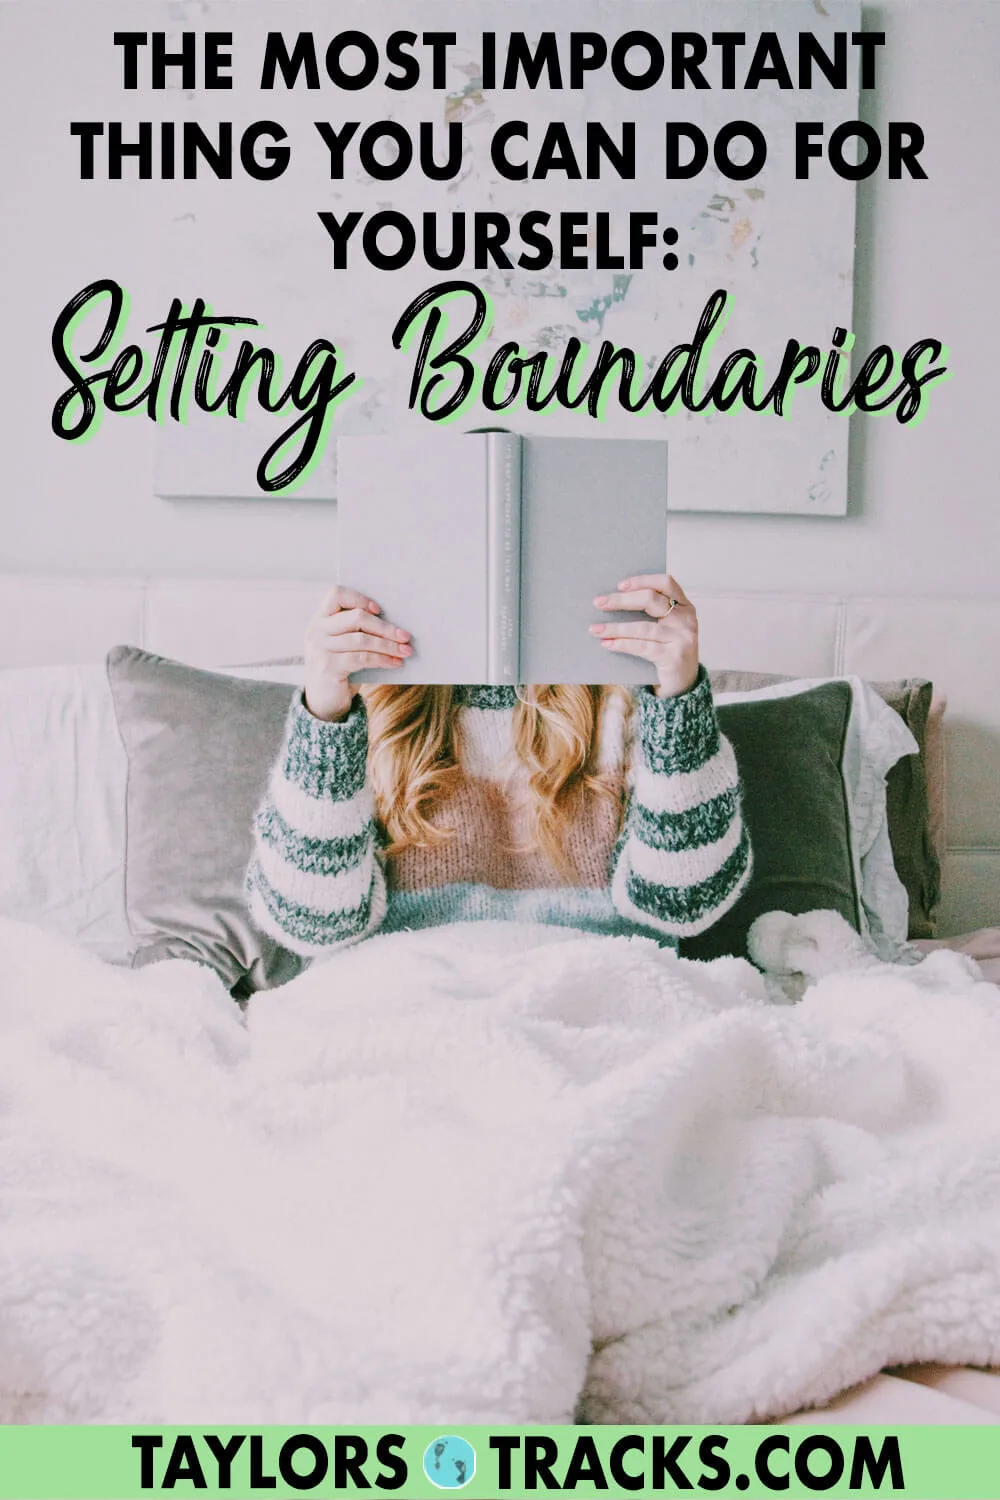 Creating healthy boundaries in your life for yourself and well as relationship boundaries, family boundaries and friend boundaries is what will help give you the space to create the life you want.